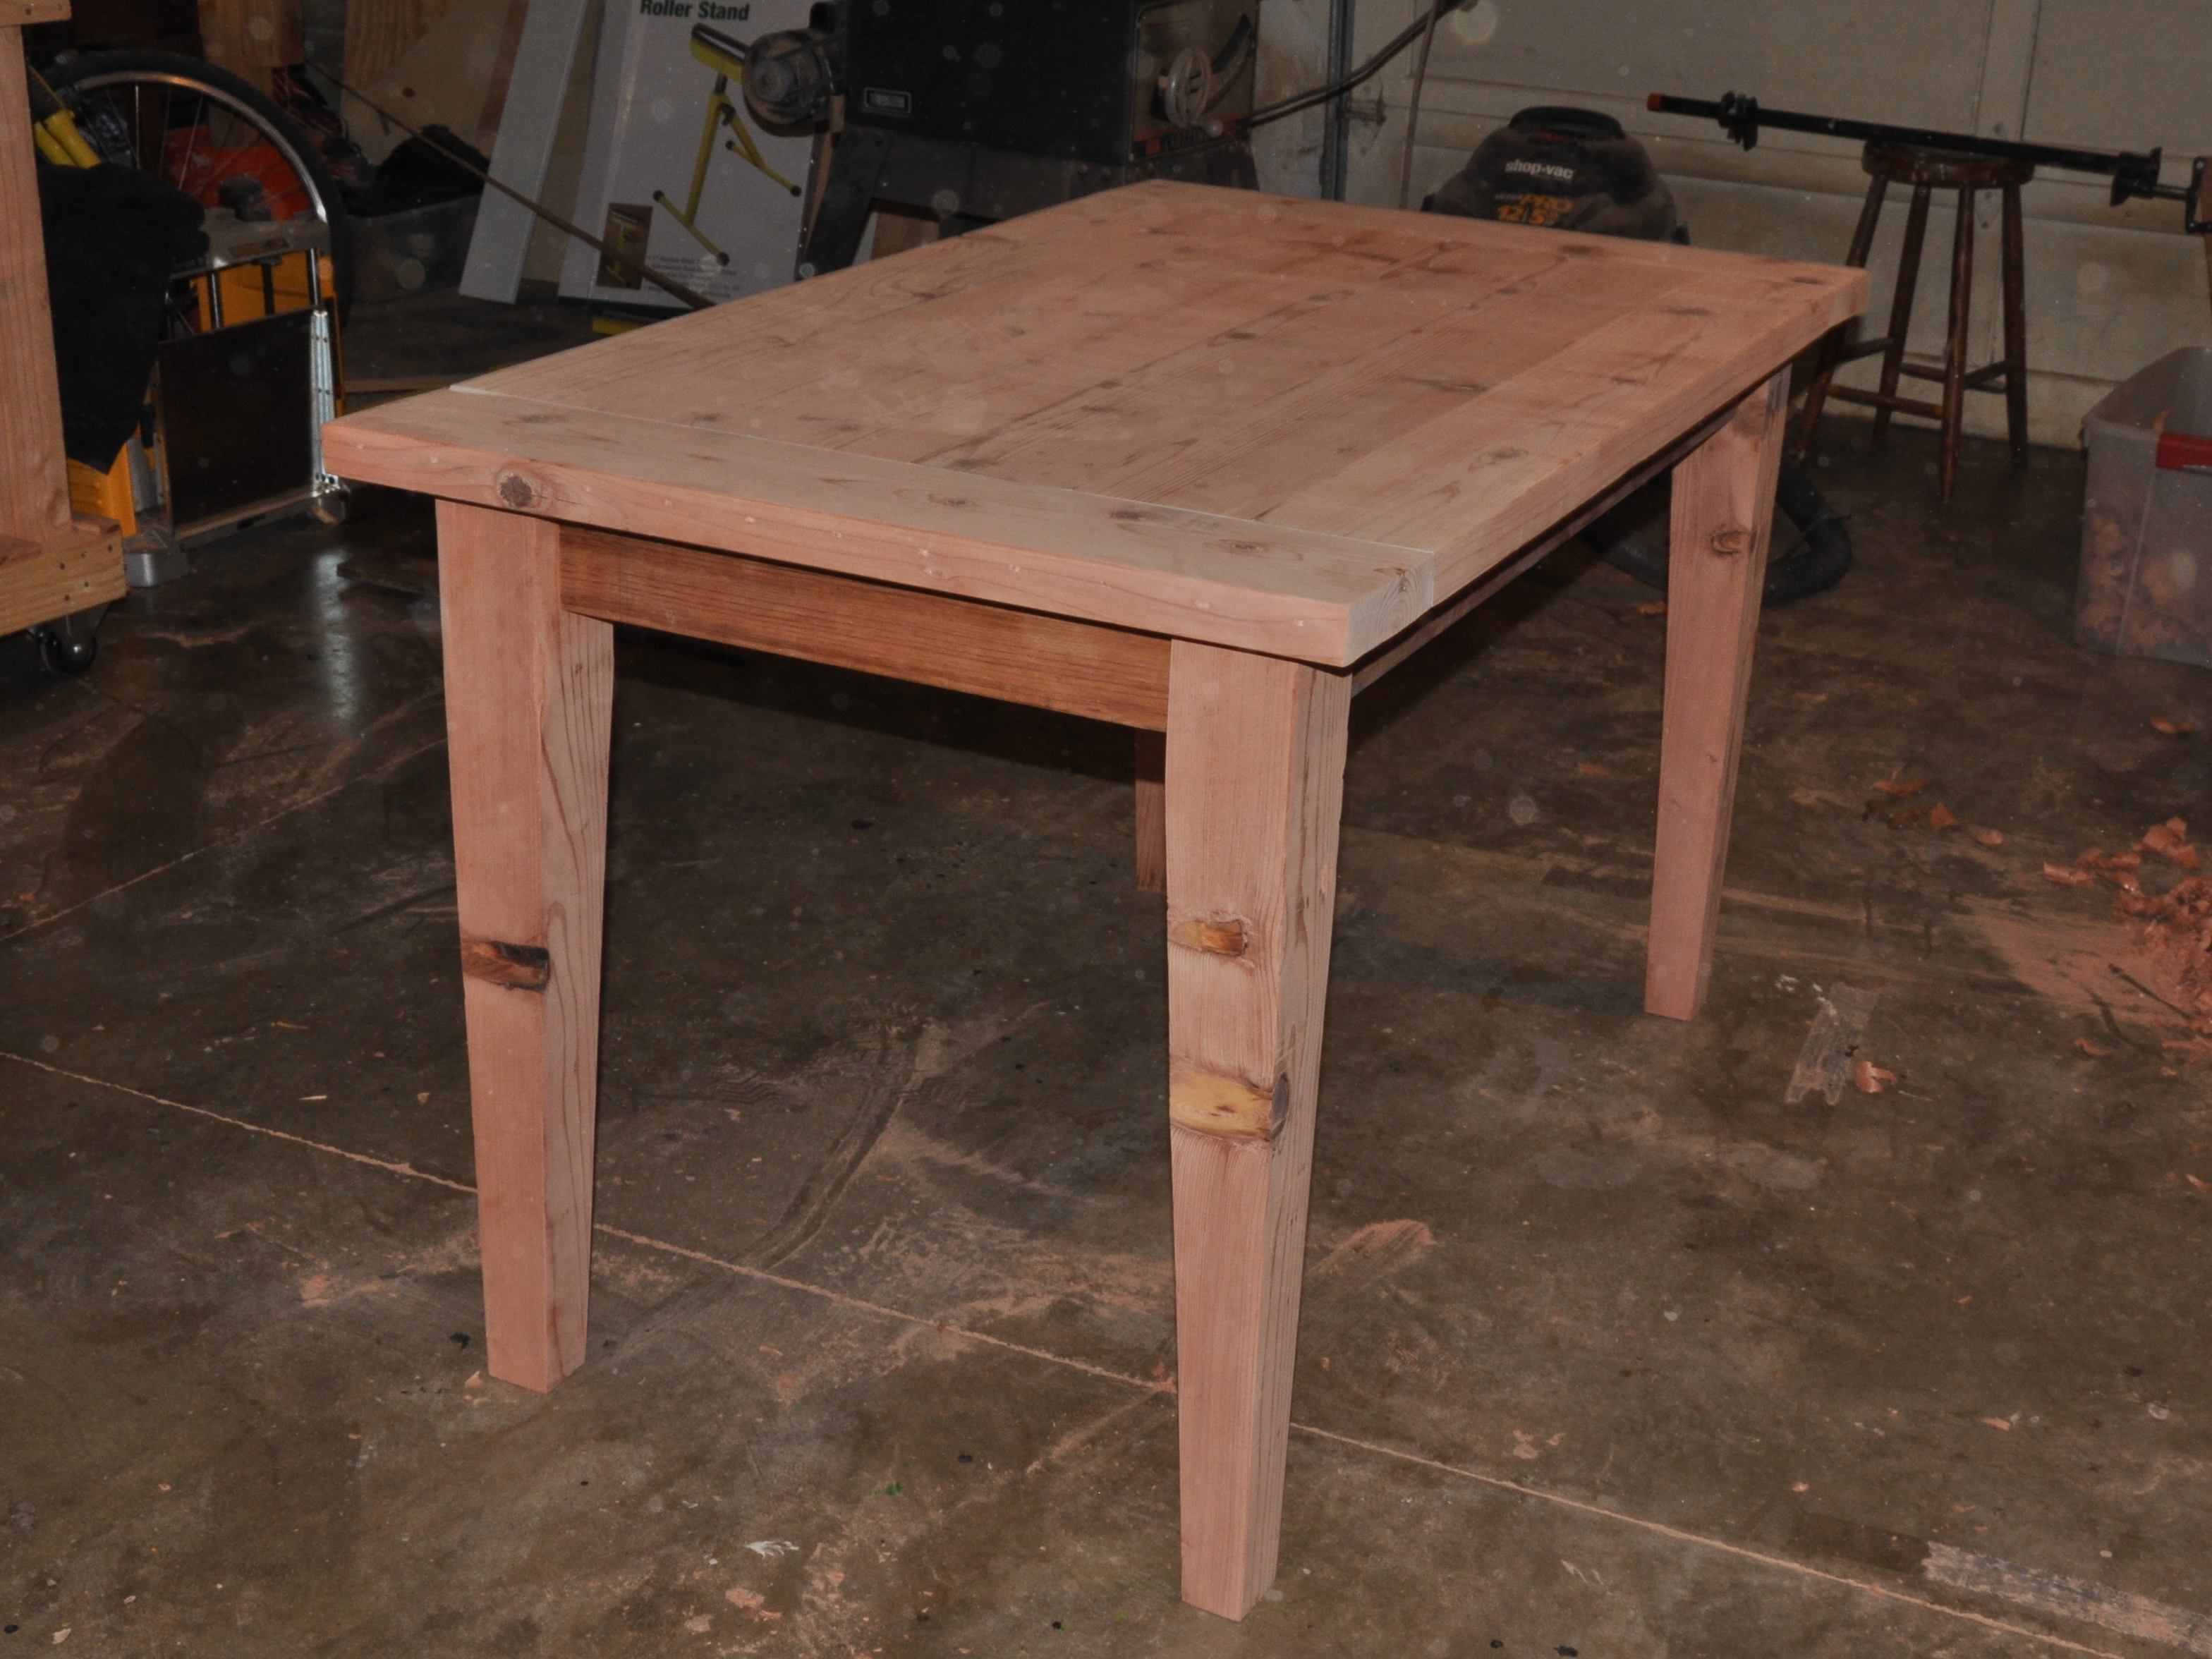 Woodworking table making